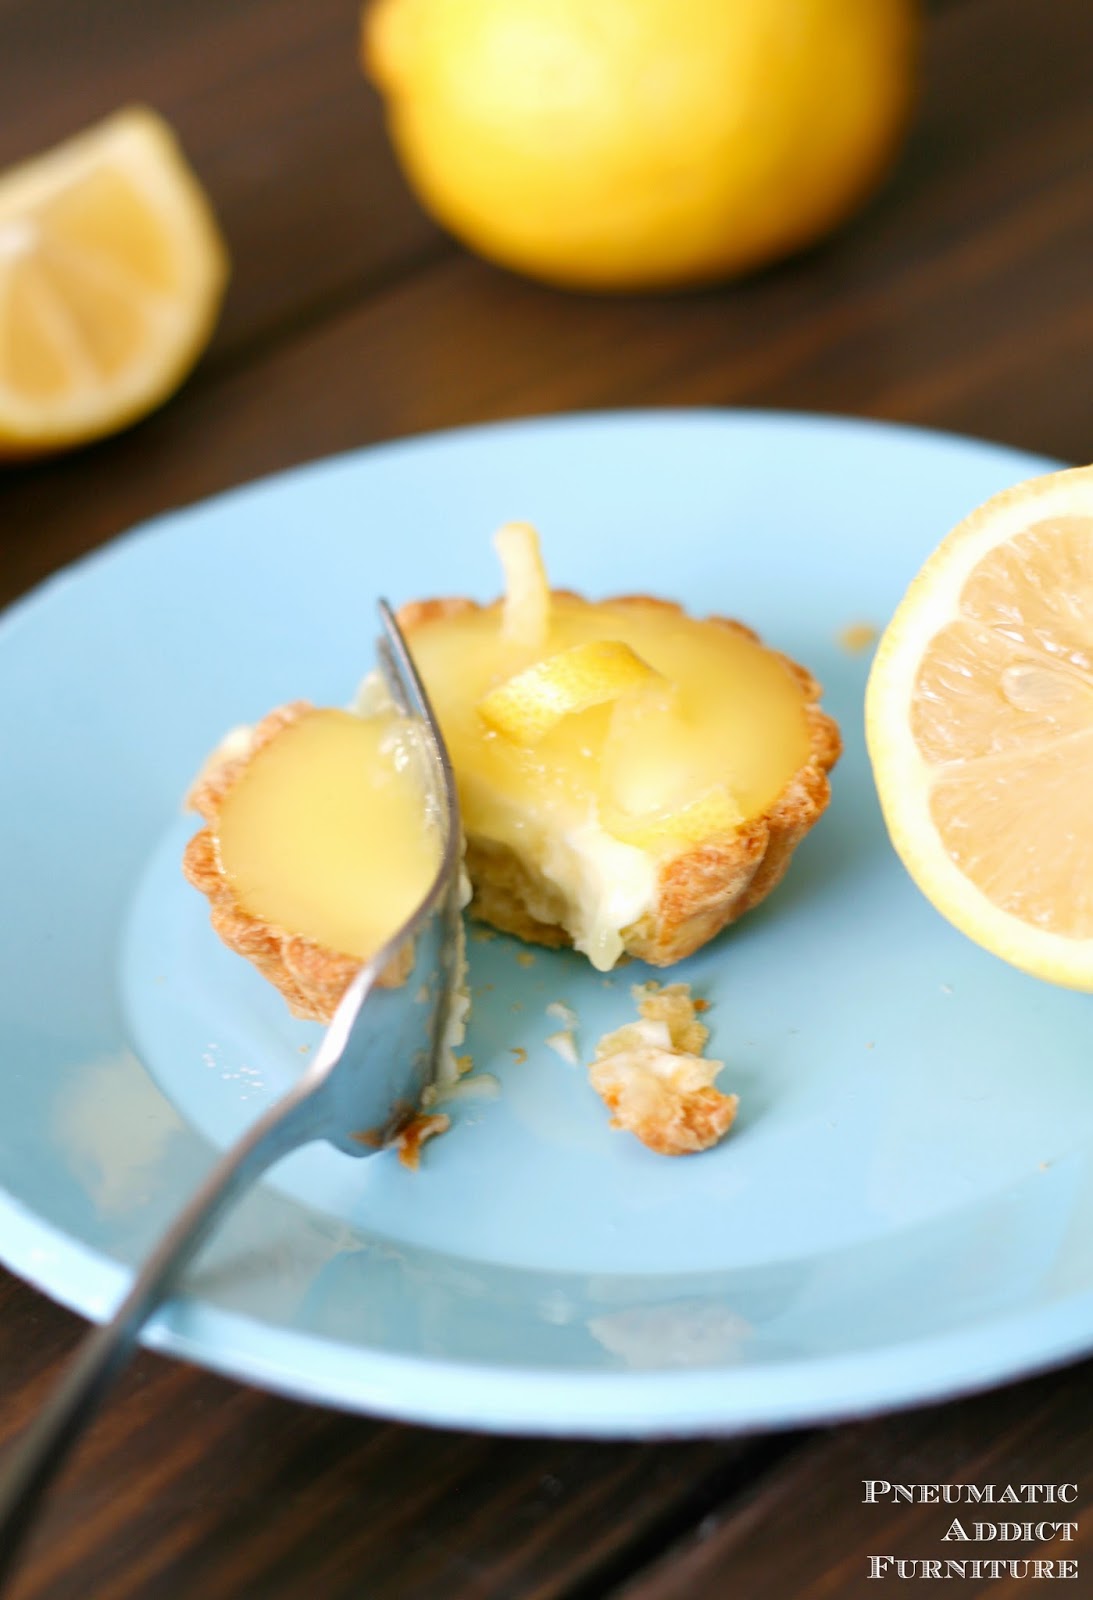 So light and refreshing! Two layers of tangy and sweet lemon filling and a buttery crust. 